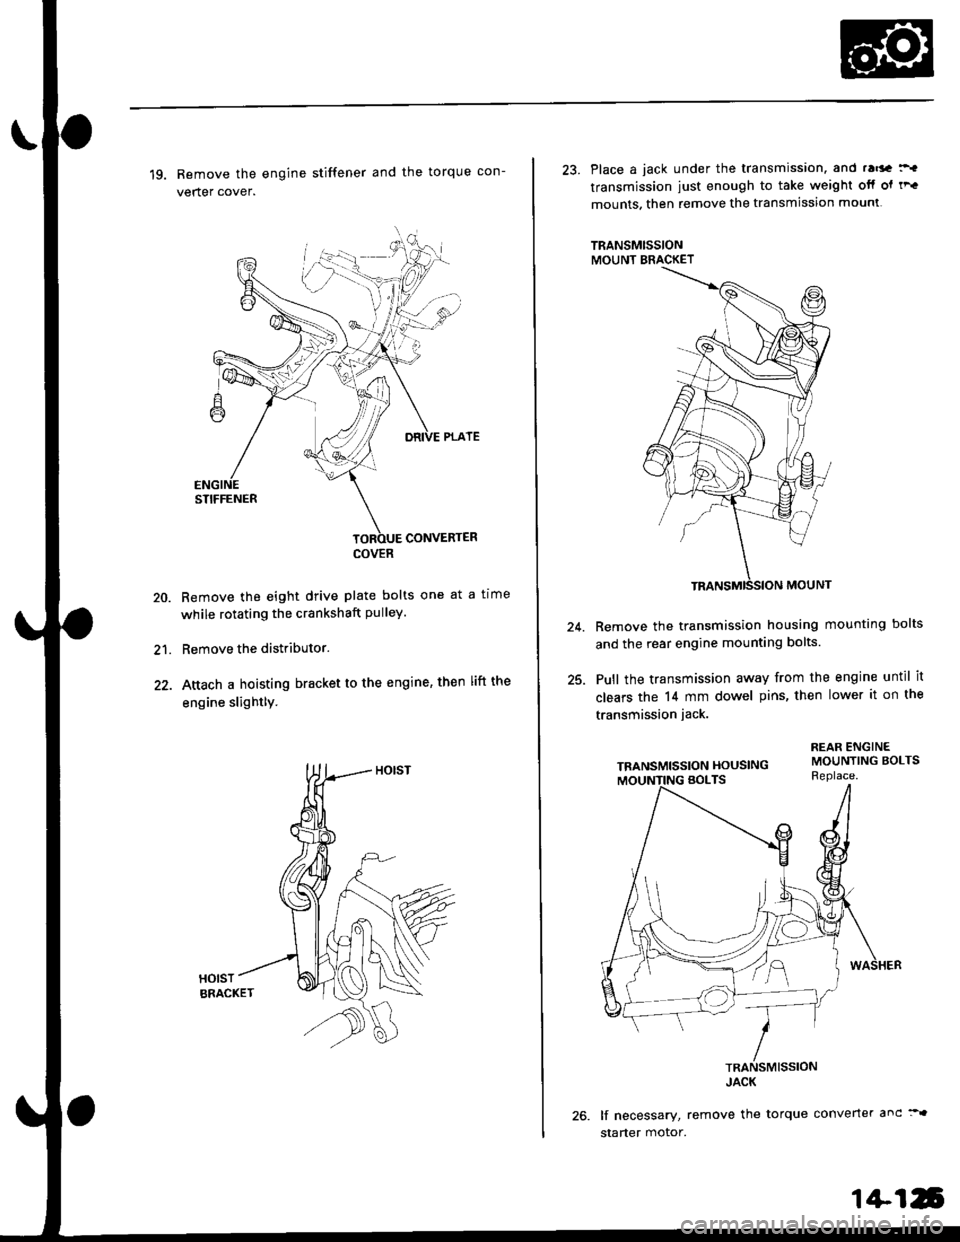 HONDA CIVIC 1996 6.G Workshop Manual 19. Remove the engine stiffener and the torque con-
verter cover.
Remove the eight drive plate bolts one at a tlme
while rotating the crankshaft pulley.
Remove the distributor.
Attach a hoisting brack